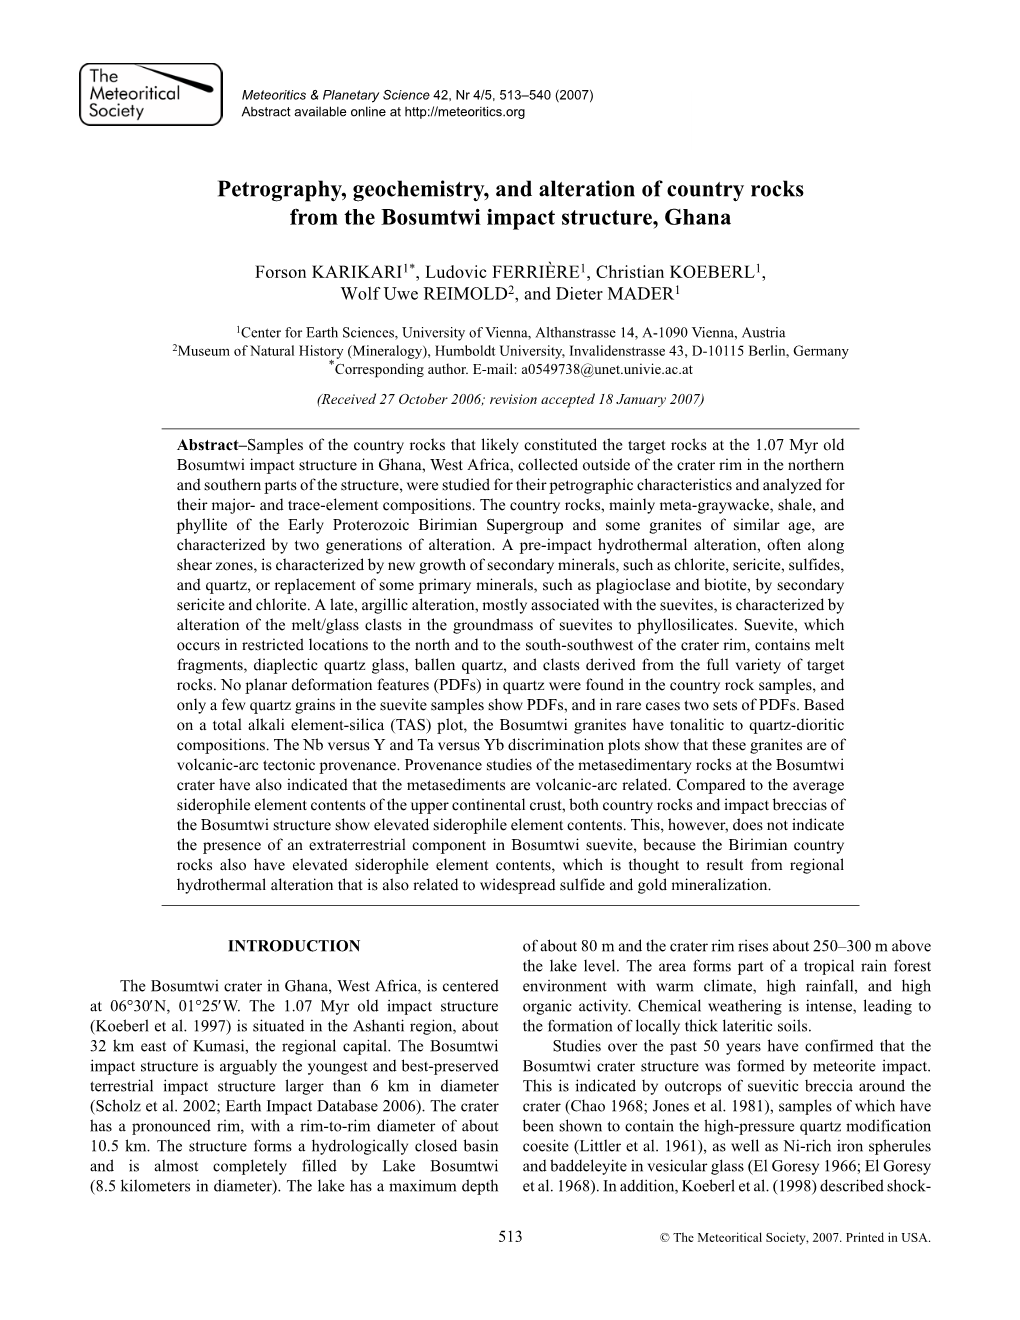 Petrography, Geochemistry, and Alteration of Country Rocks from the Bosumtwi Impact Structure, Ghana